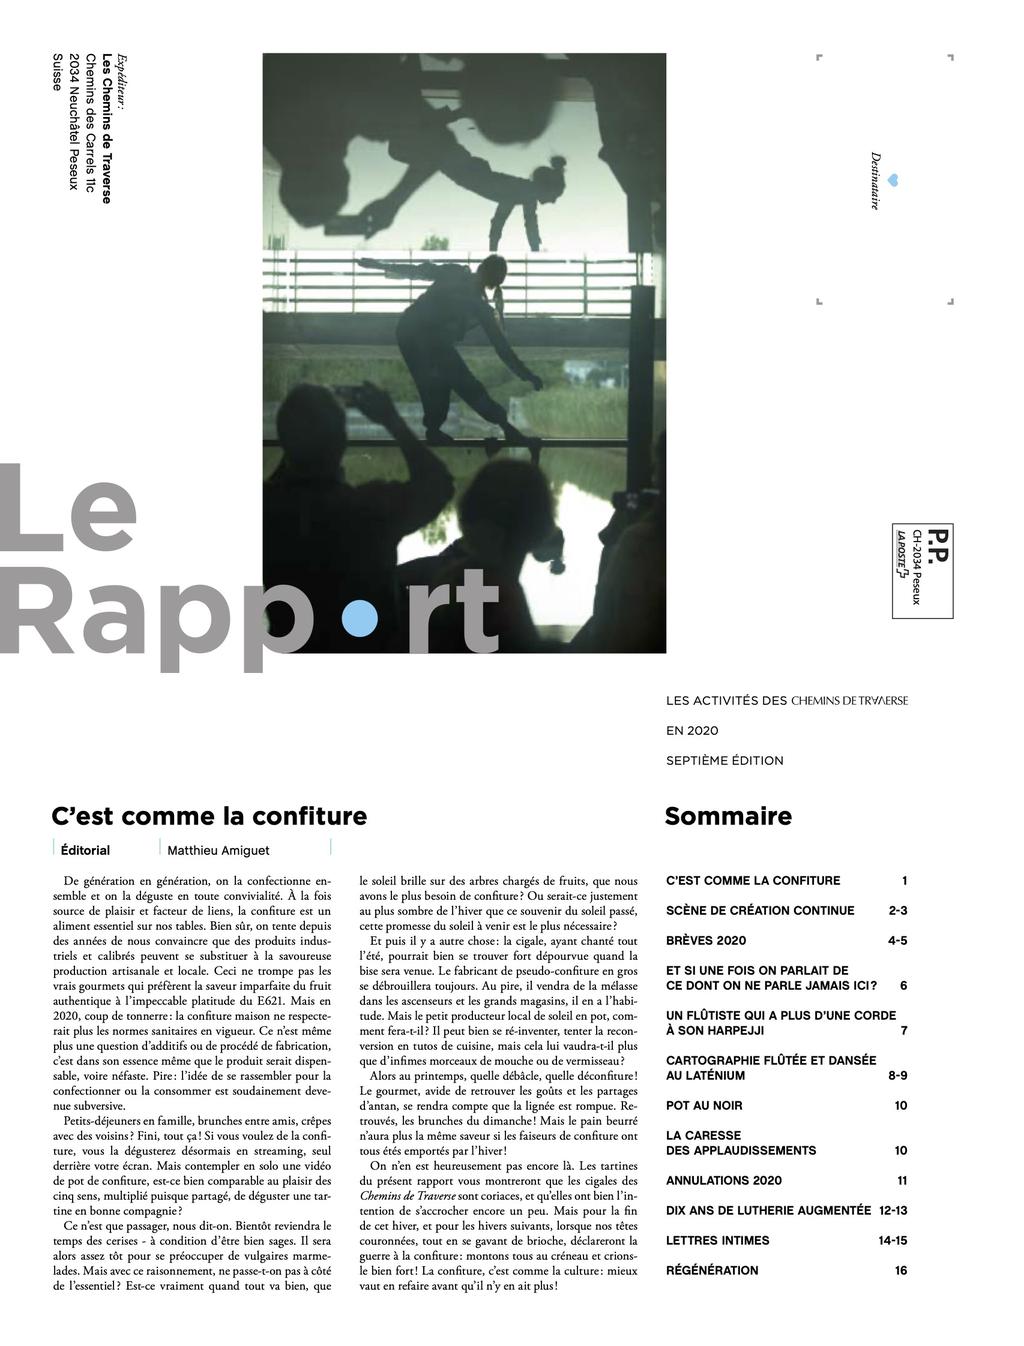 Rapport #7 - page 1